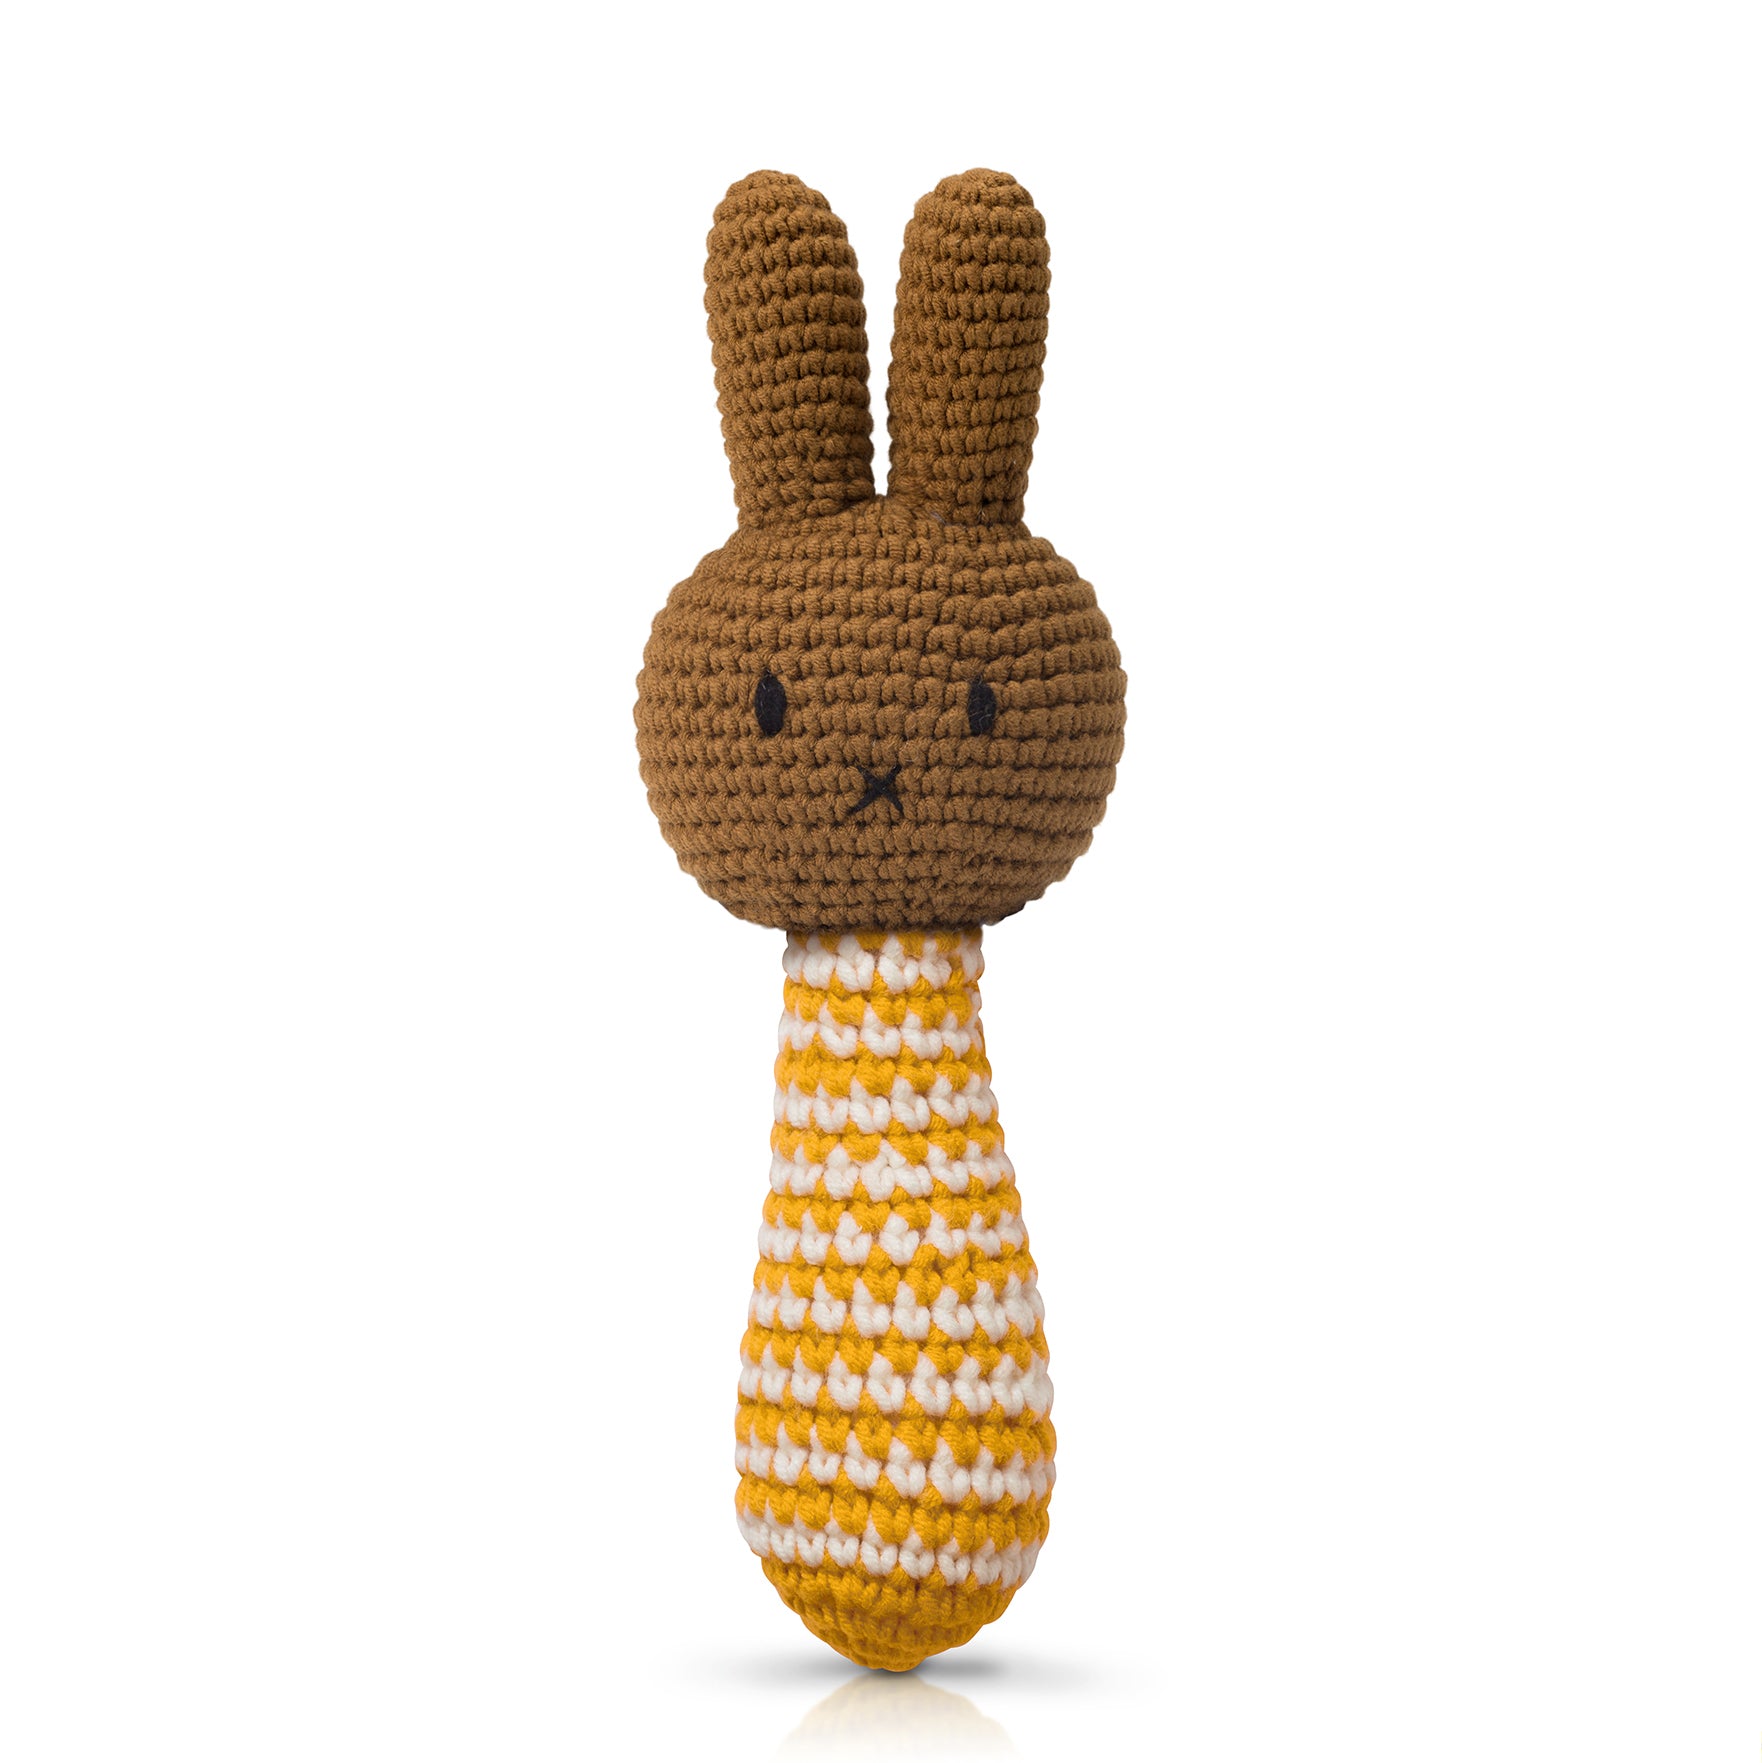 Handmade Miffy rattle (Available in 3 colors)